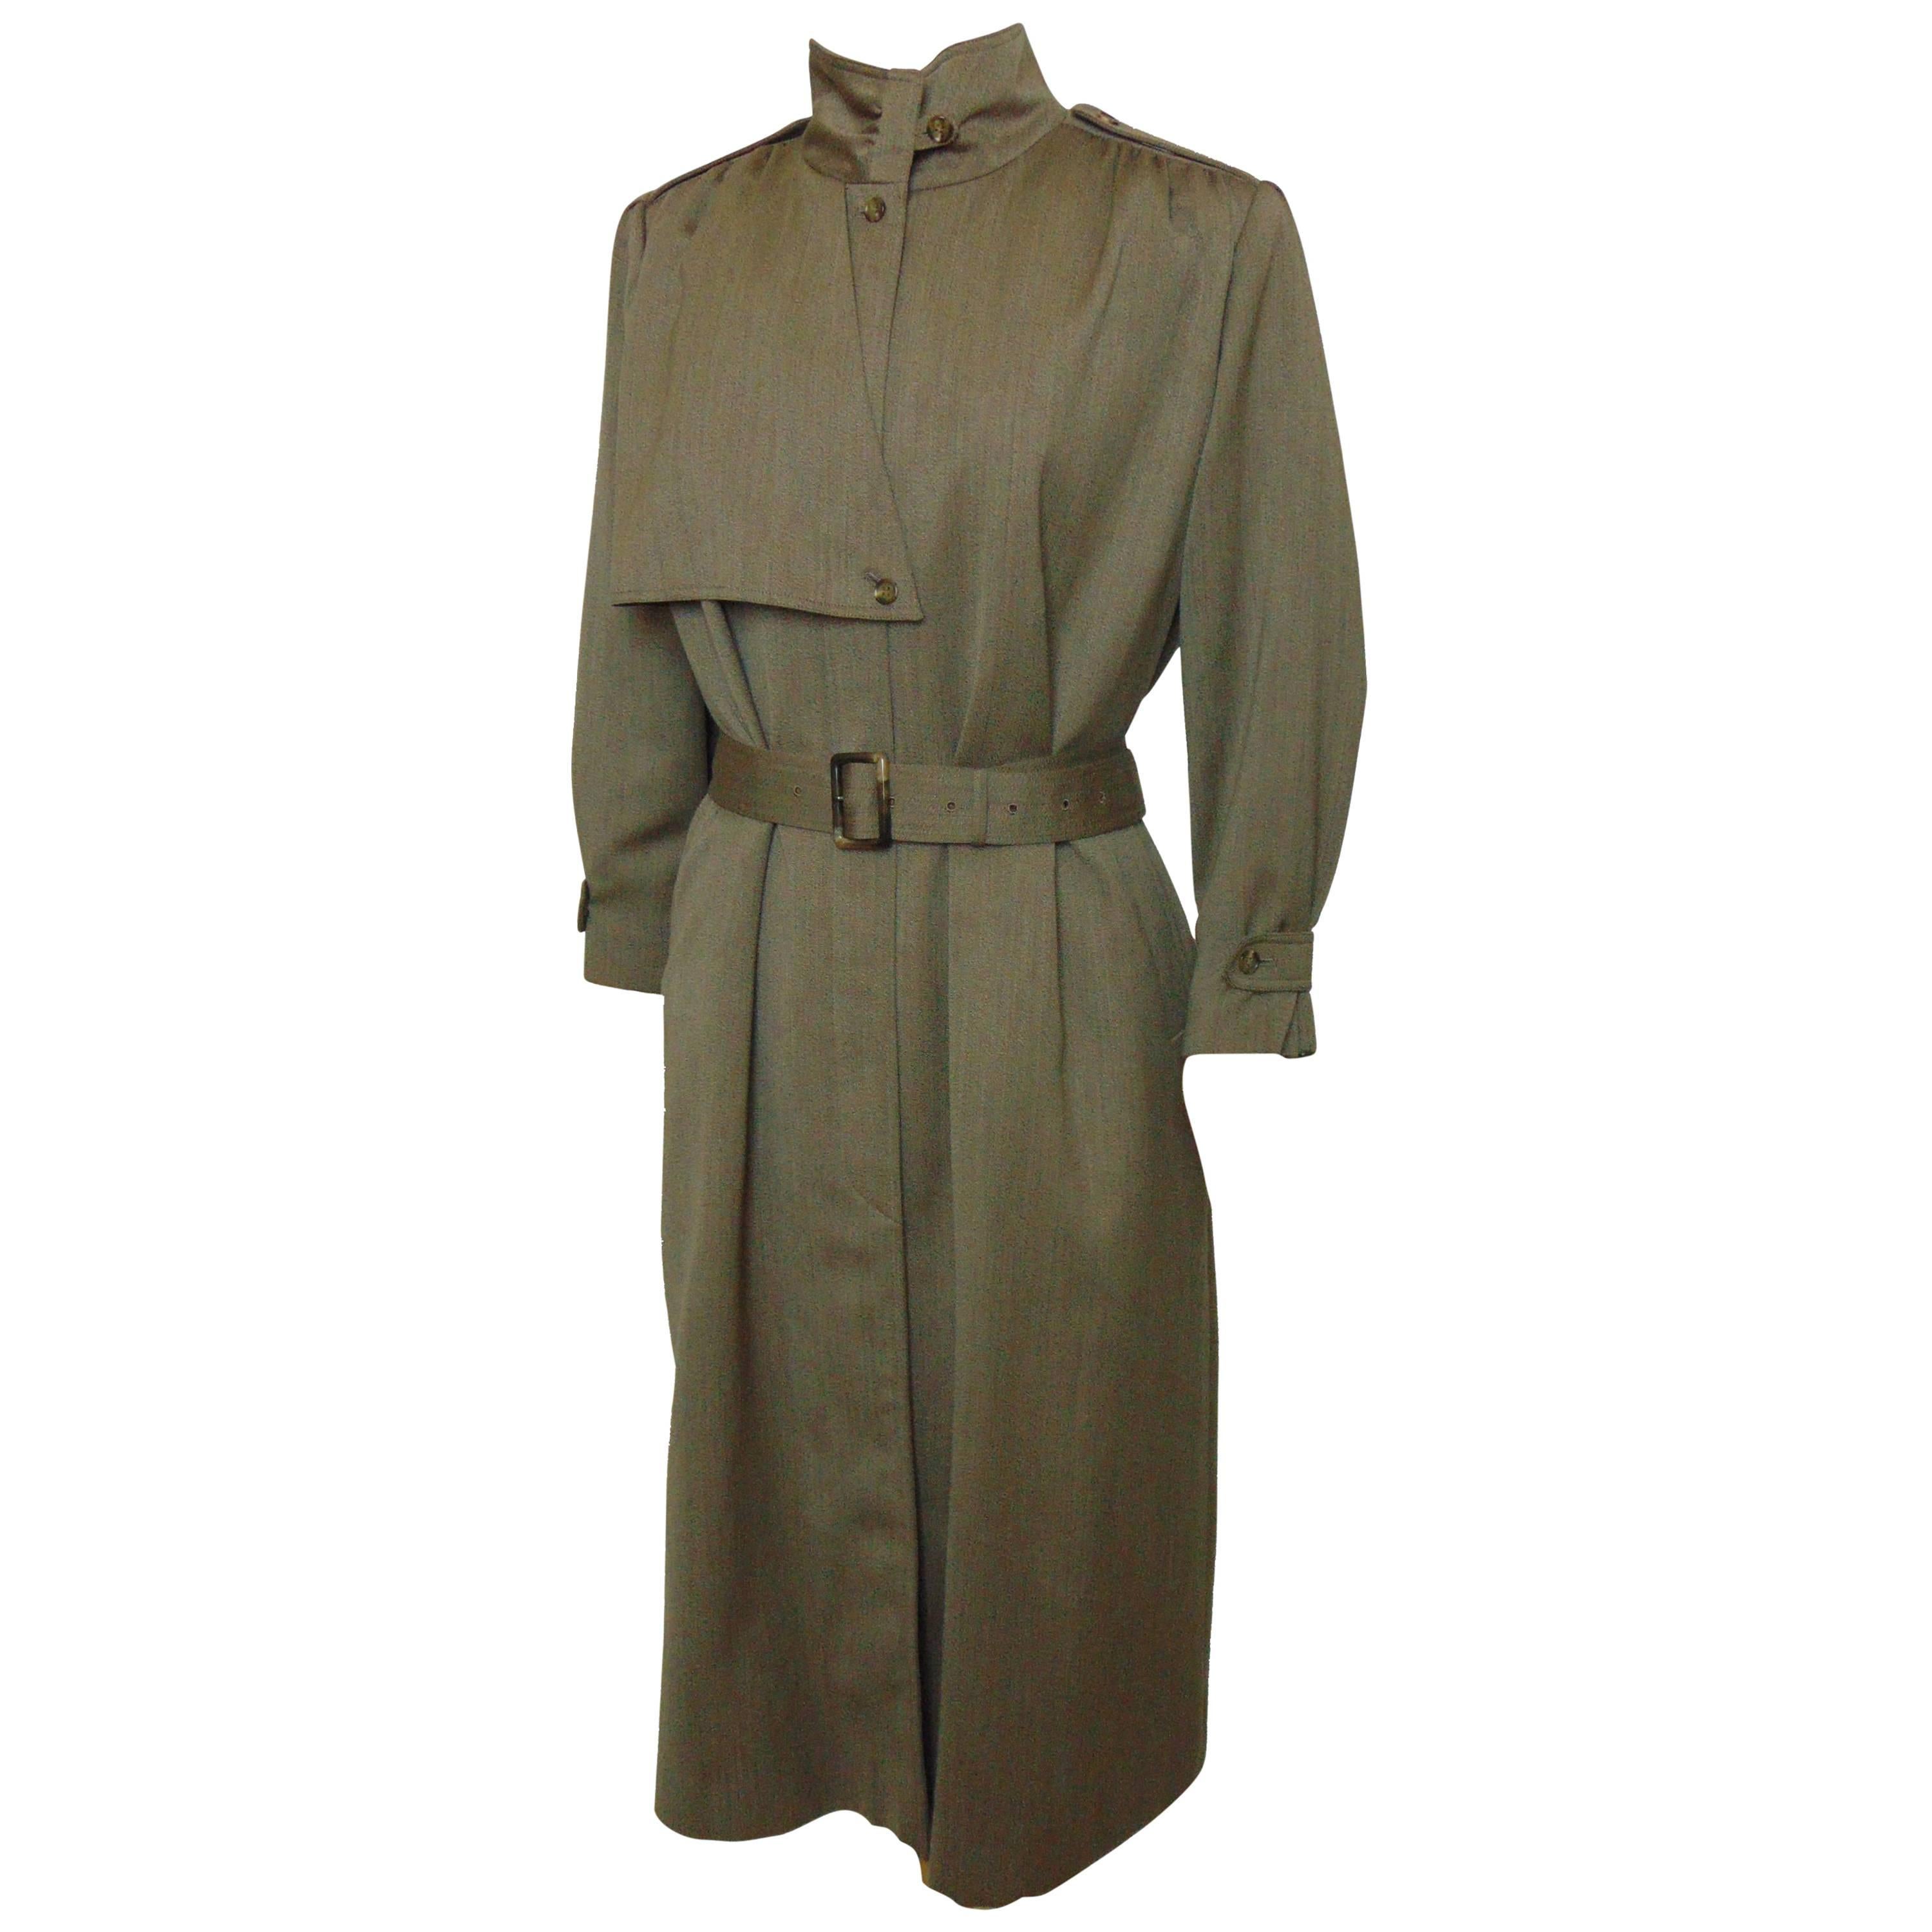 Saks Fifth Avenue Sanyo Ladies Wool Trench Coat with Removable Lining Sz 10 90s